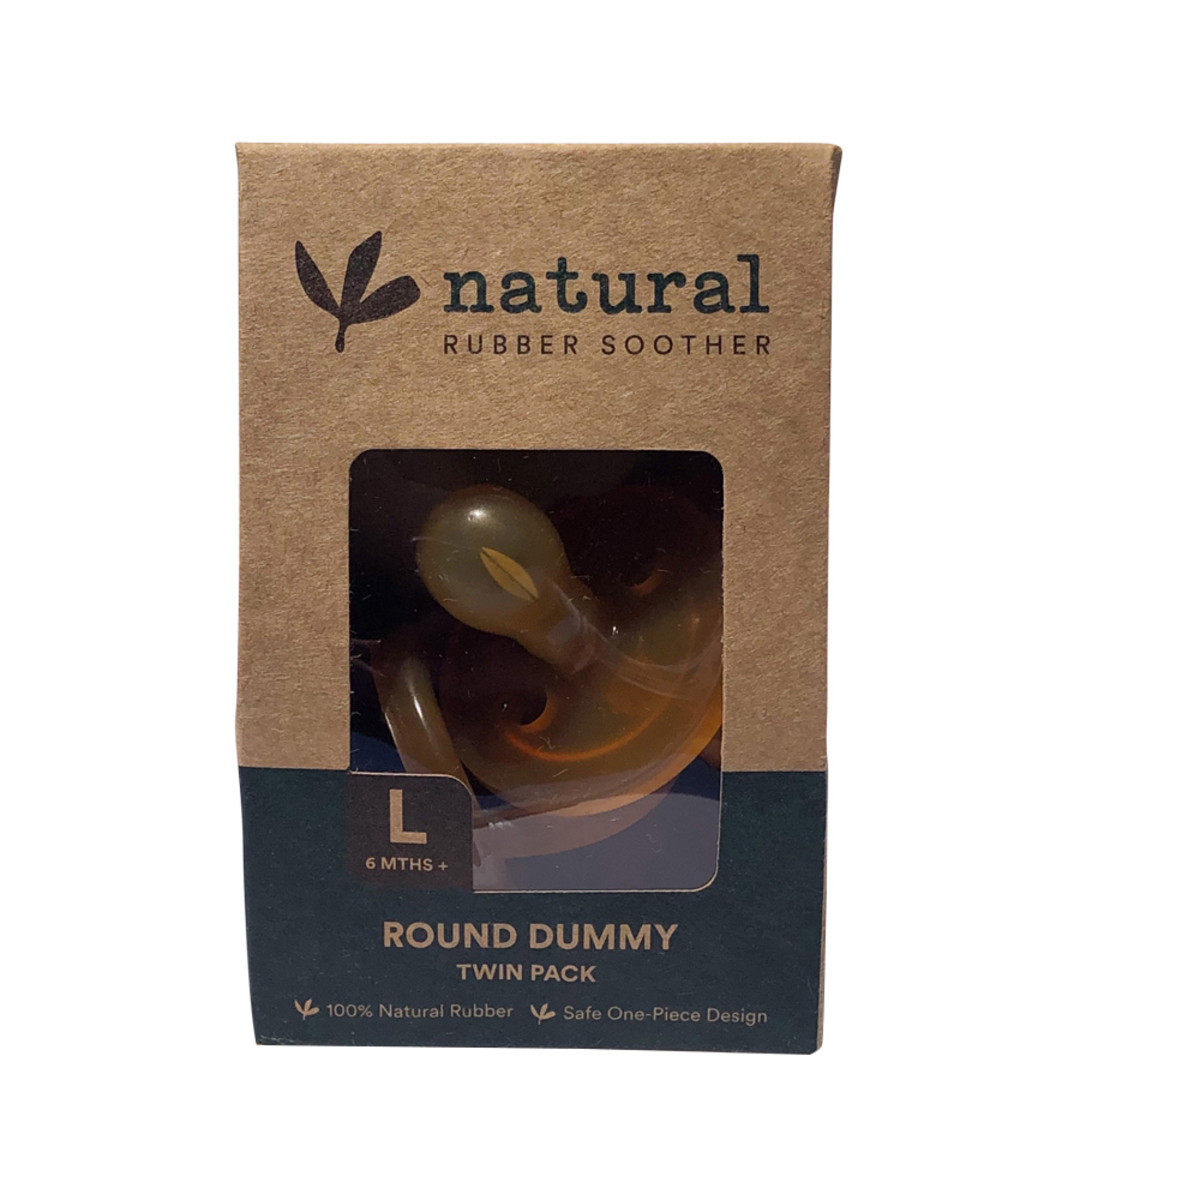 Natural Rubber Soother Round Dummy Large (6+ Months) Twin Pack